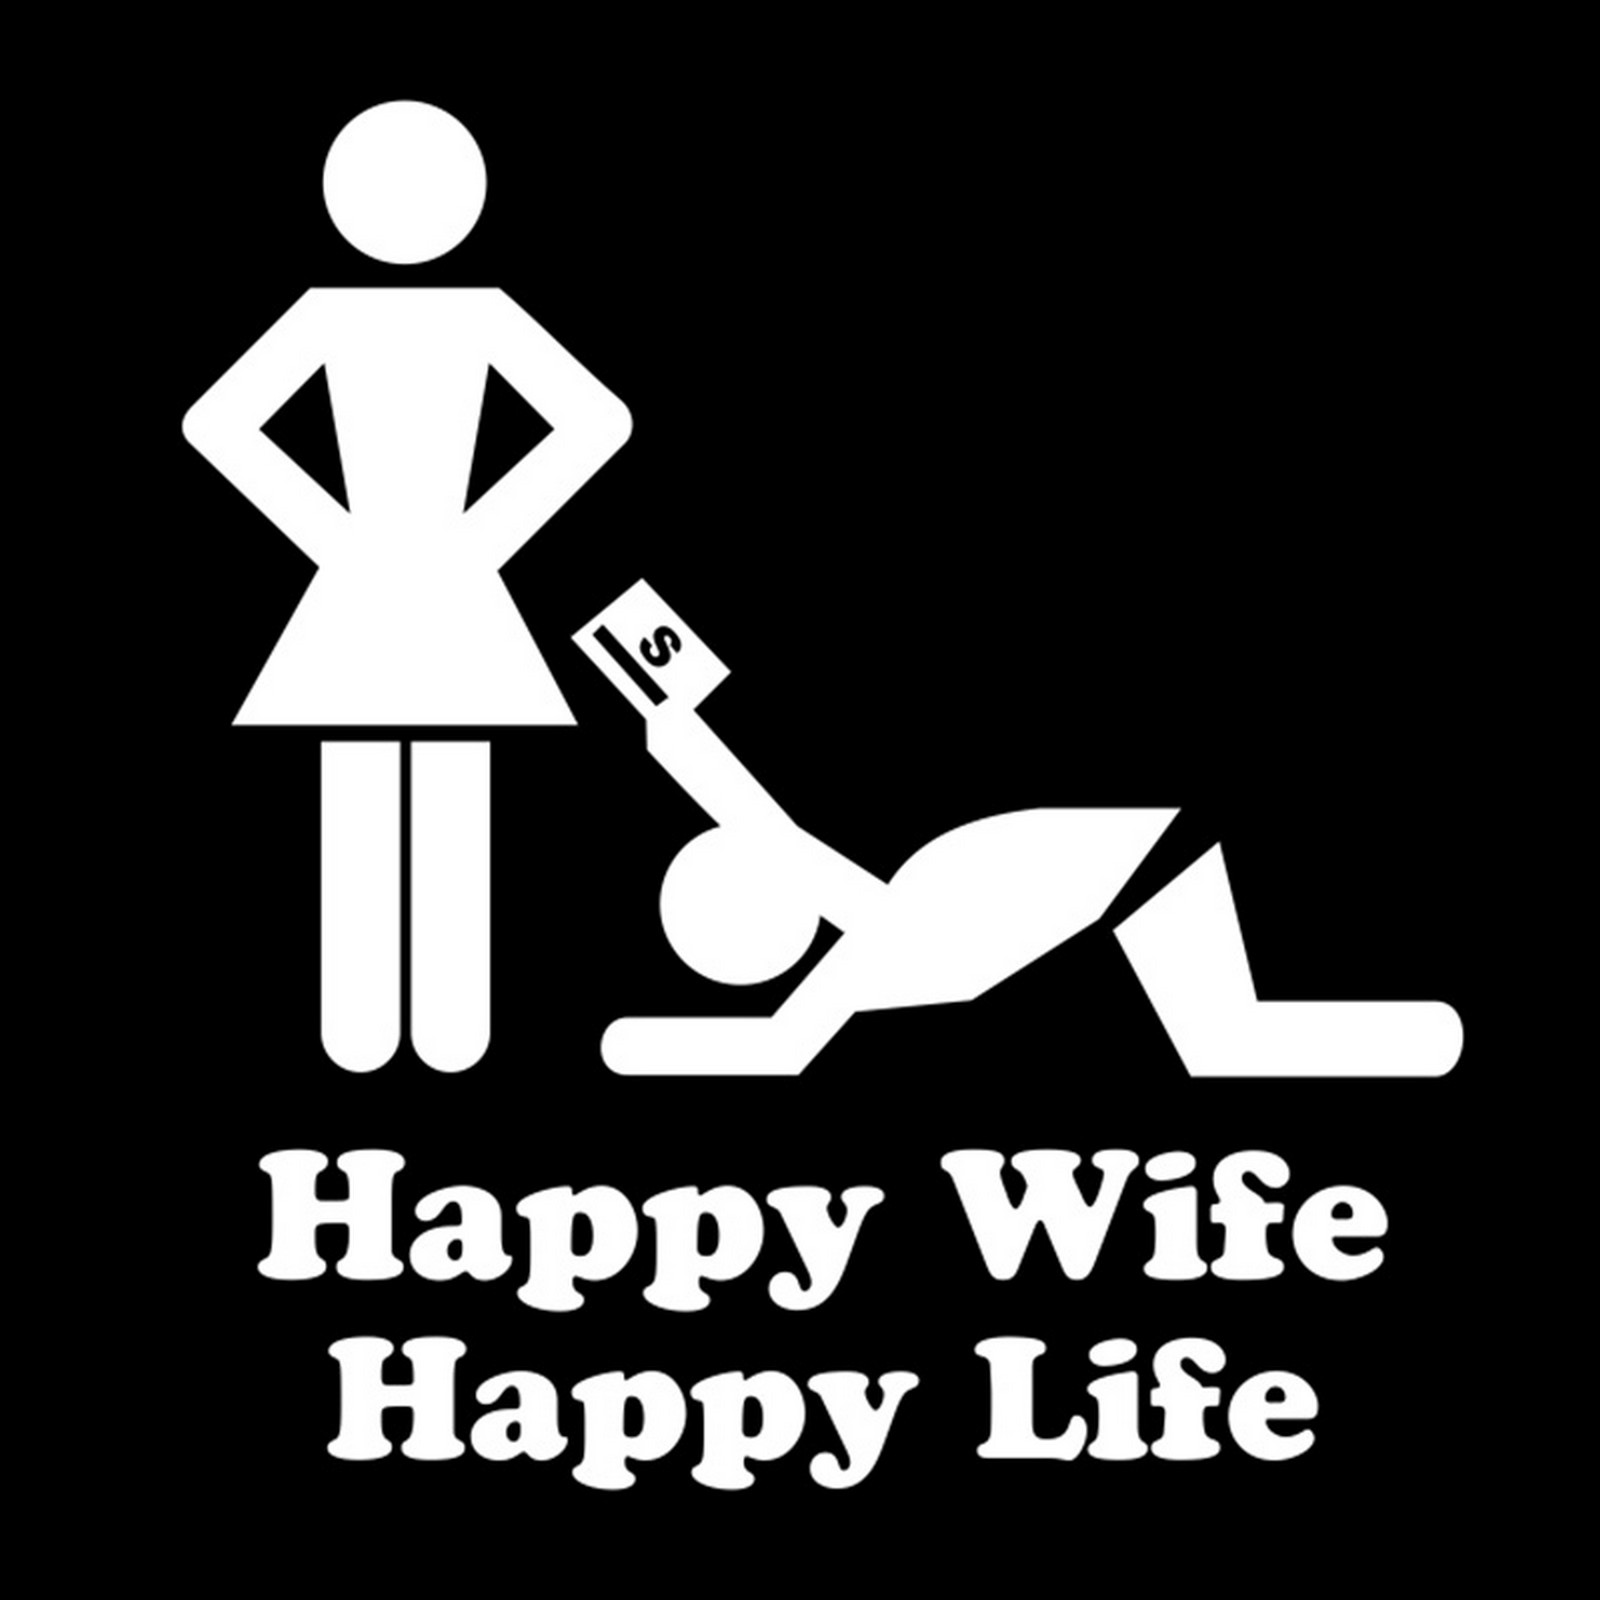 Yes, Dear” Henpecked Husbands and One-Sided Relationship Dynamics